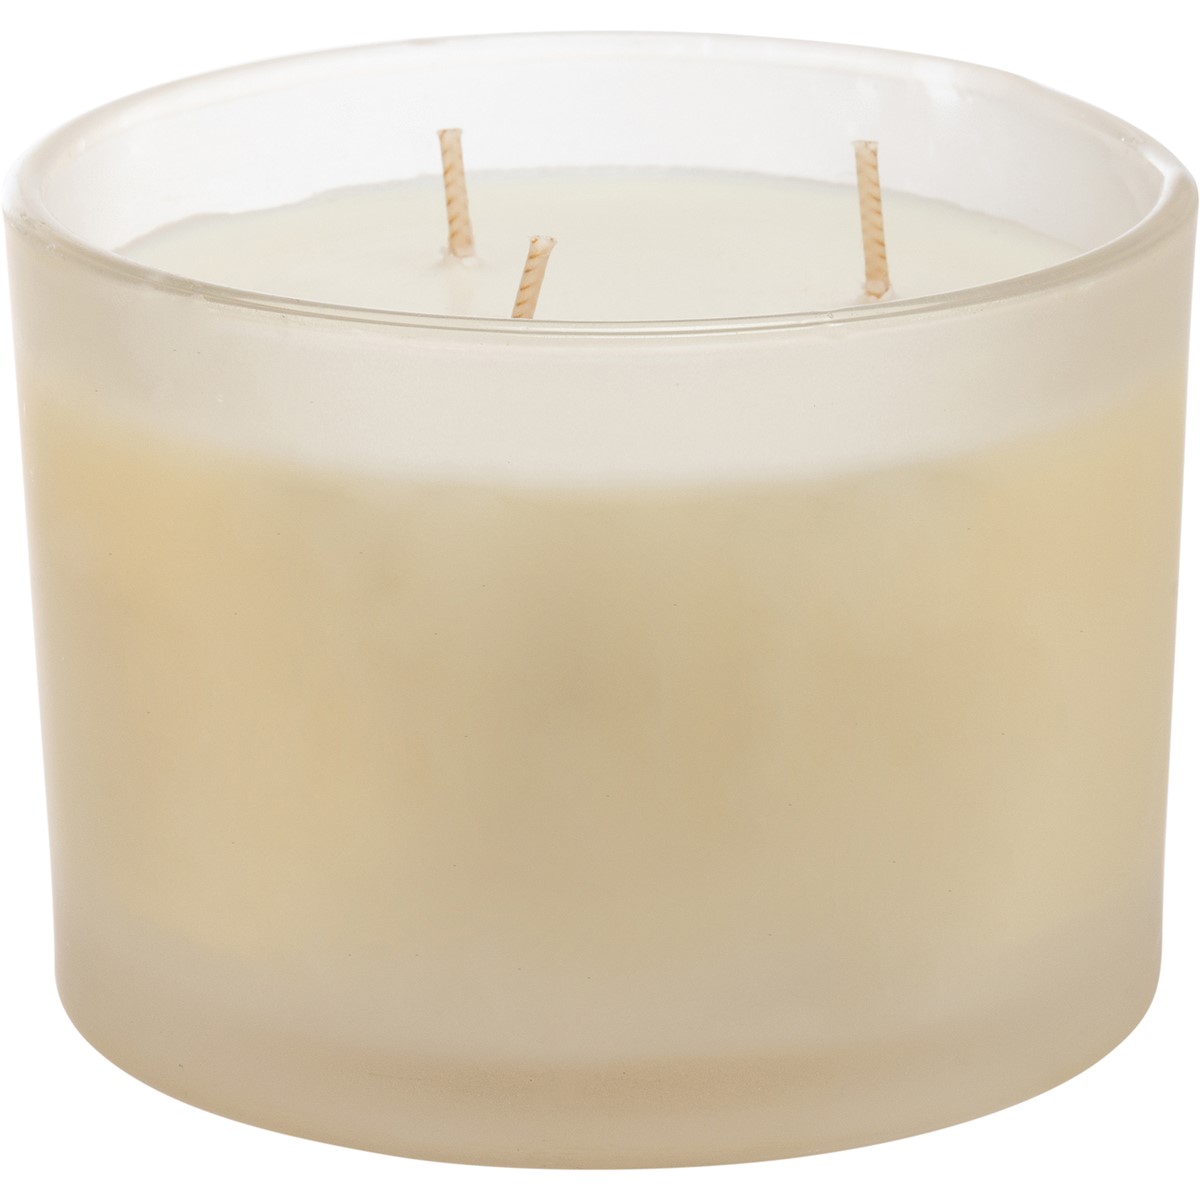 People Who Love Dogs Are The Best Jar Candle - Soy Wax, Glass, Cotton